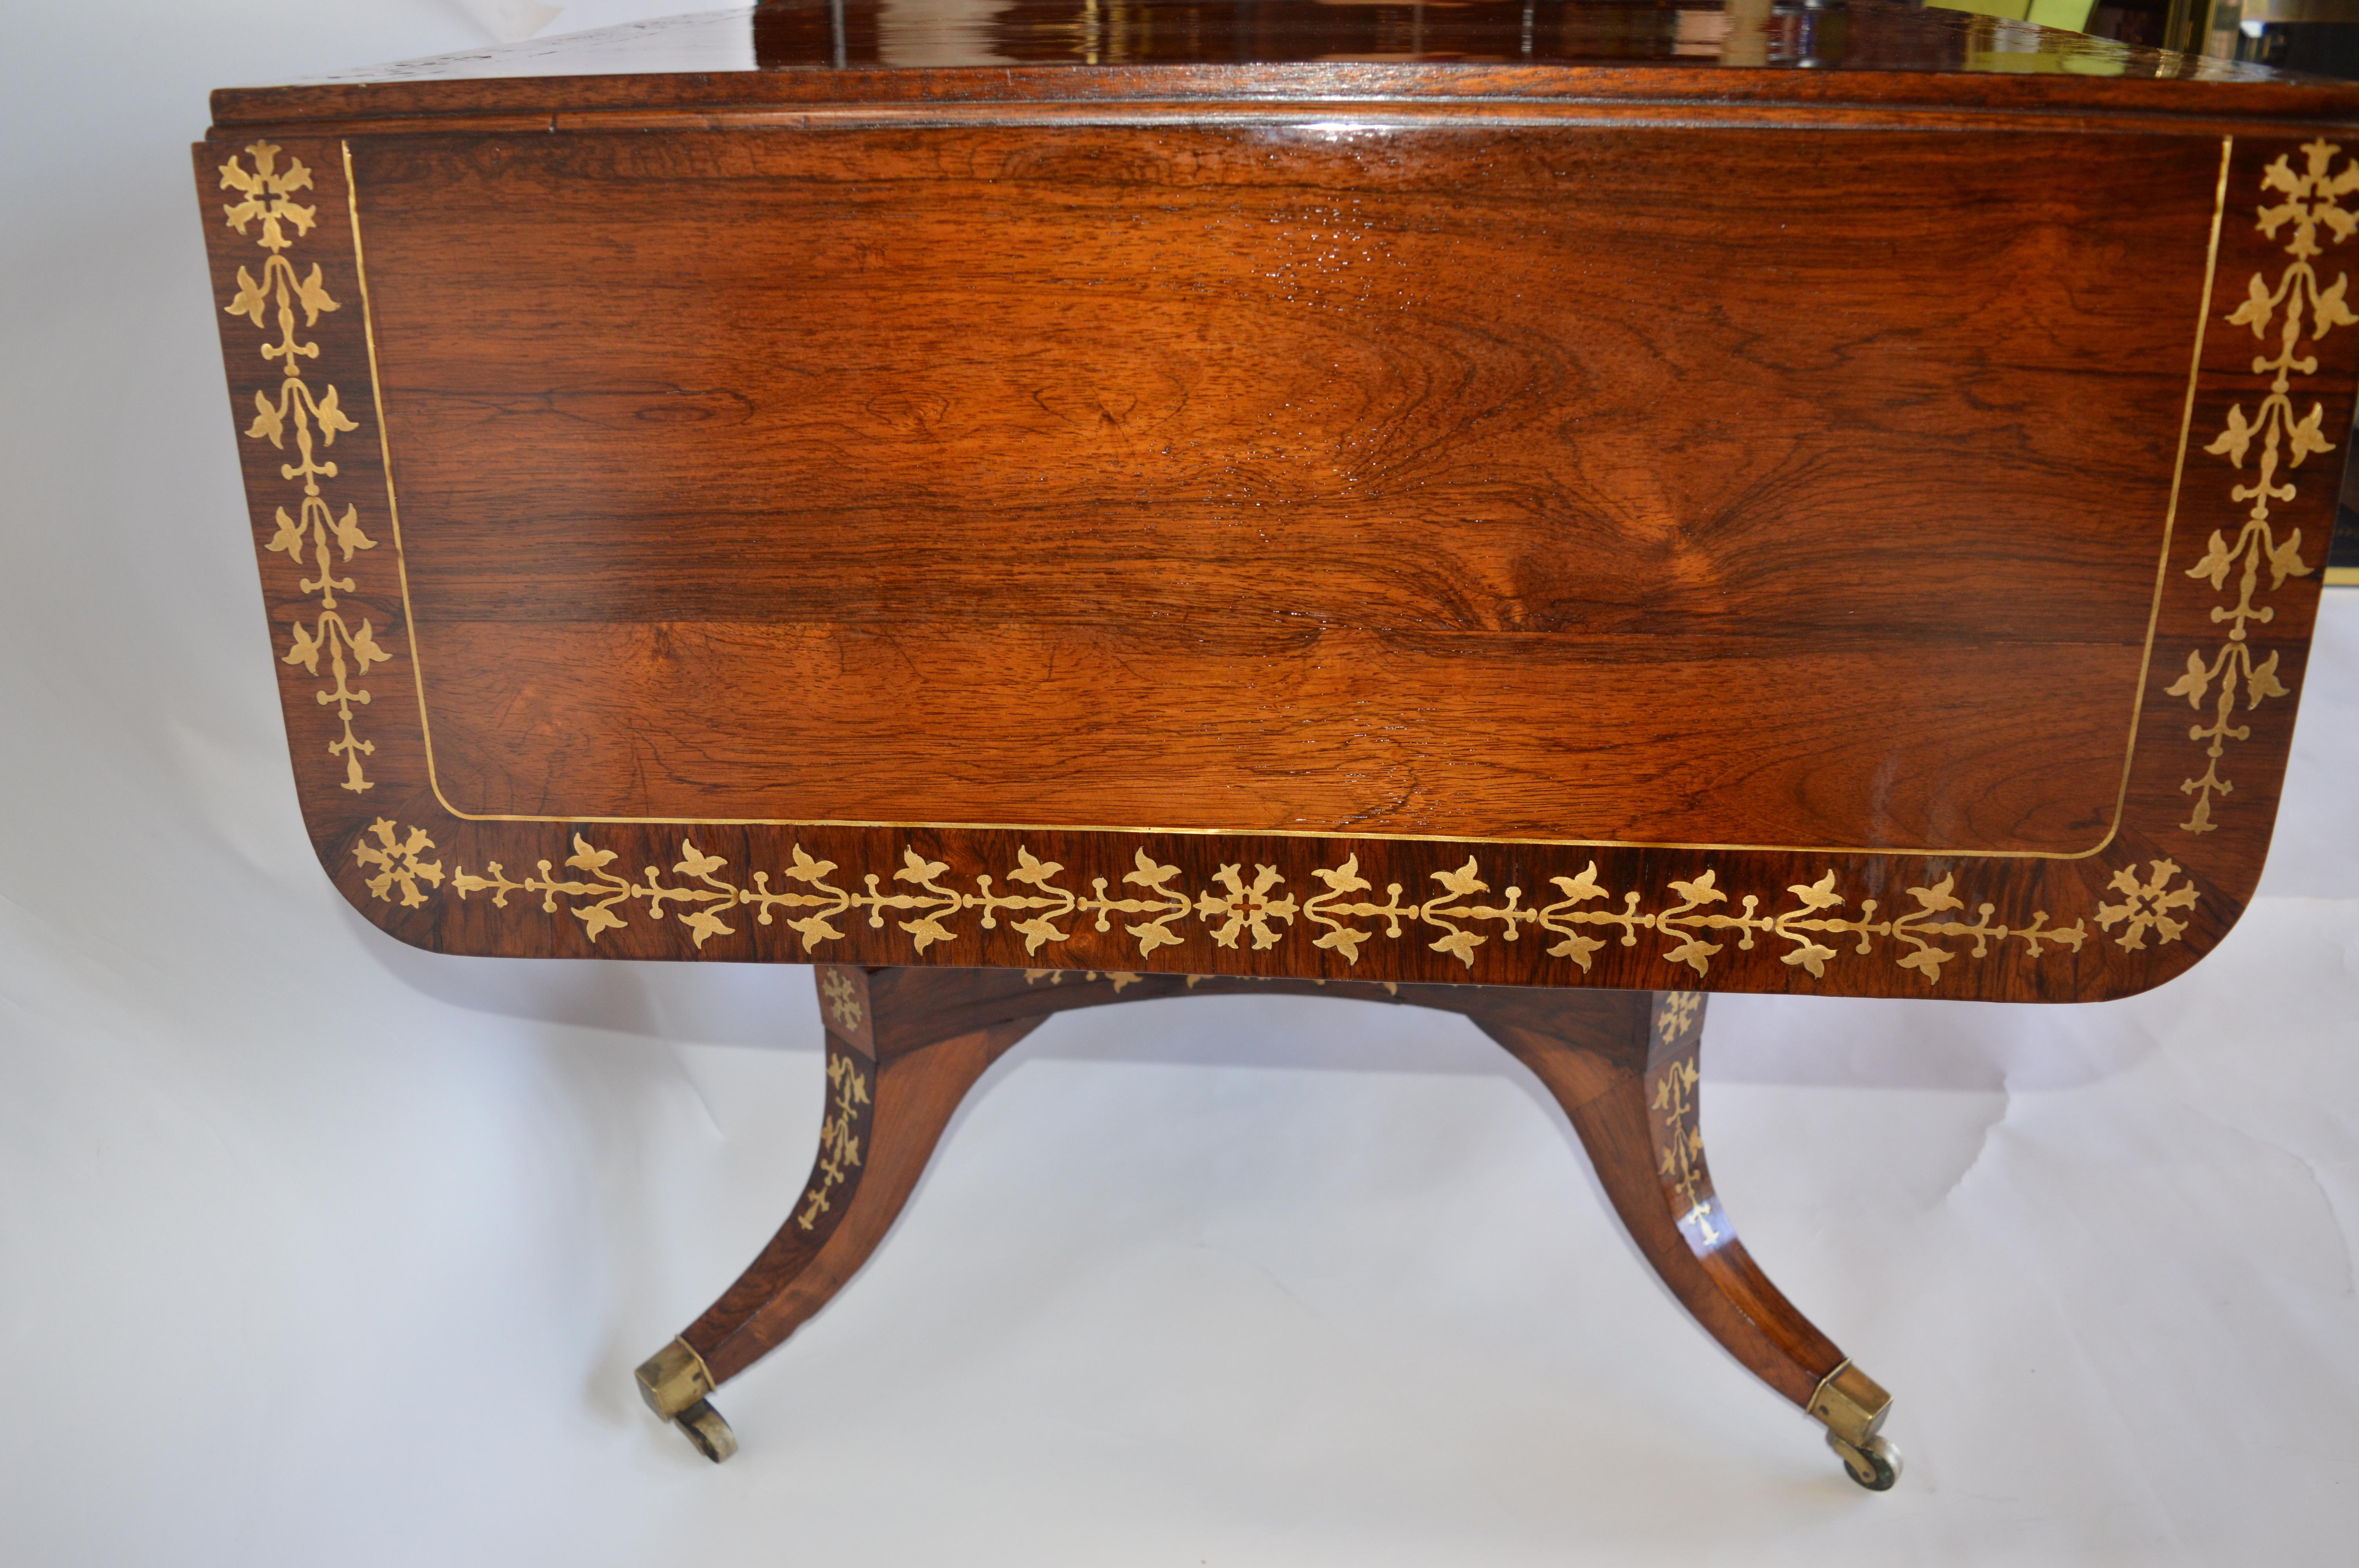 Regency Rosewood Pedestal Table with Brass Inlaid For Sale 9